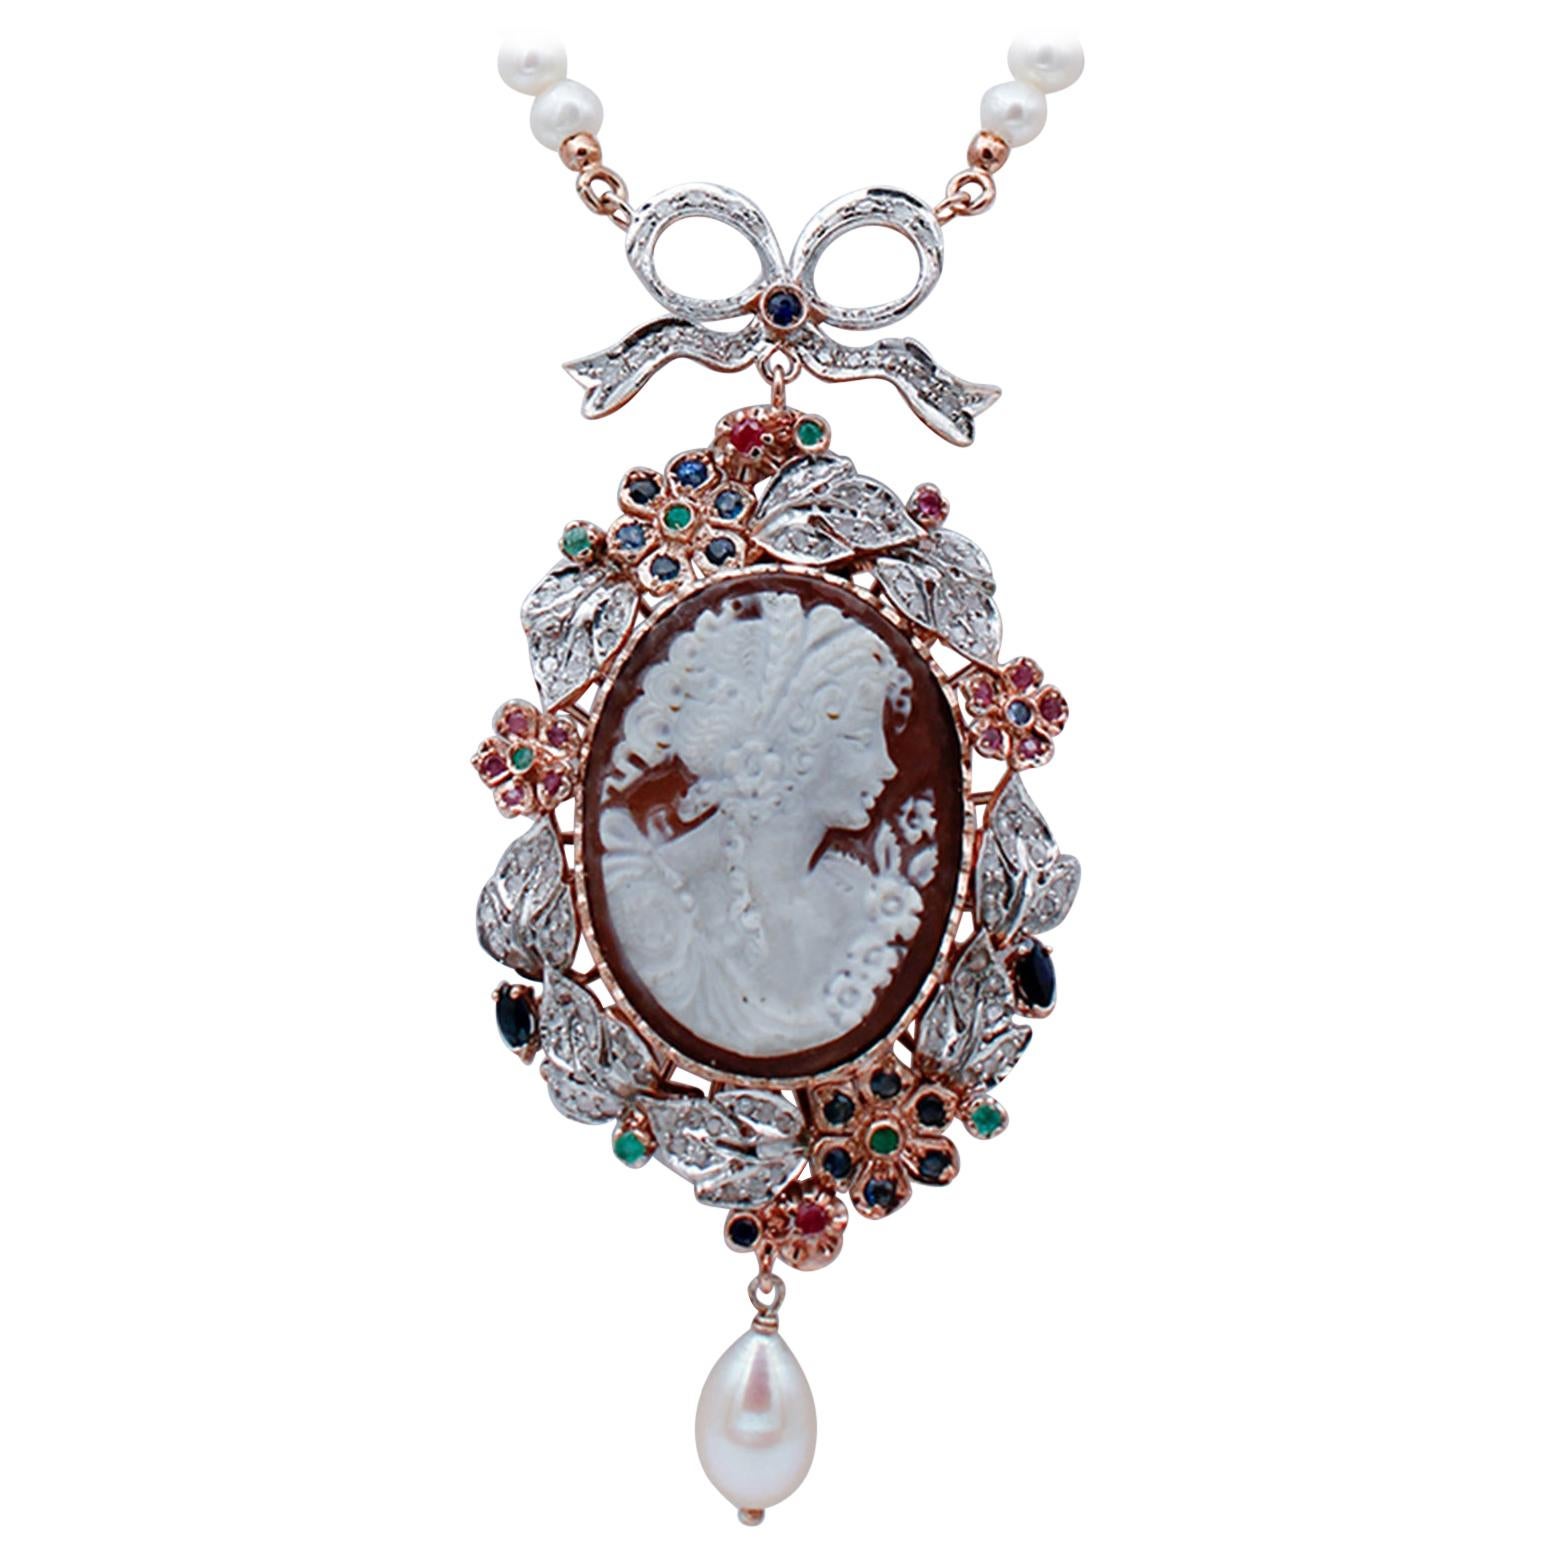 Diamonds Emeralds Sapphires Rubies, Pearls, Cameo, 14kt Gold and Silver Necklace